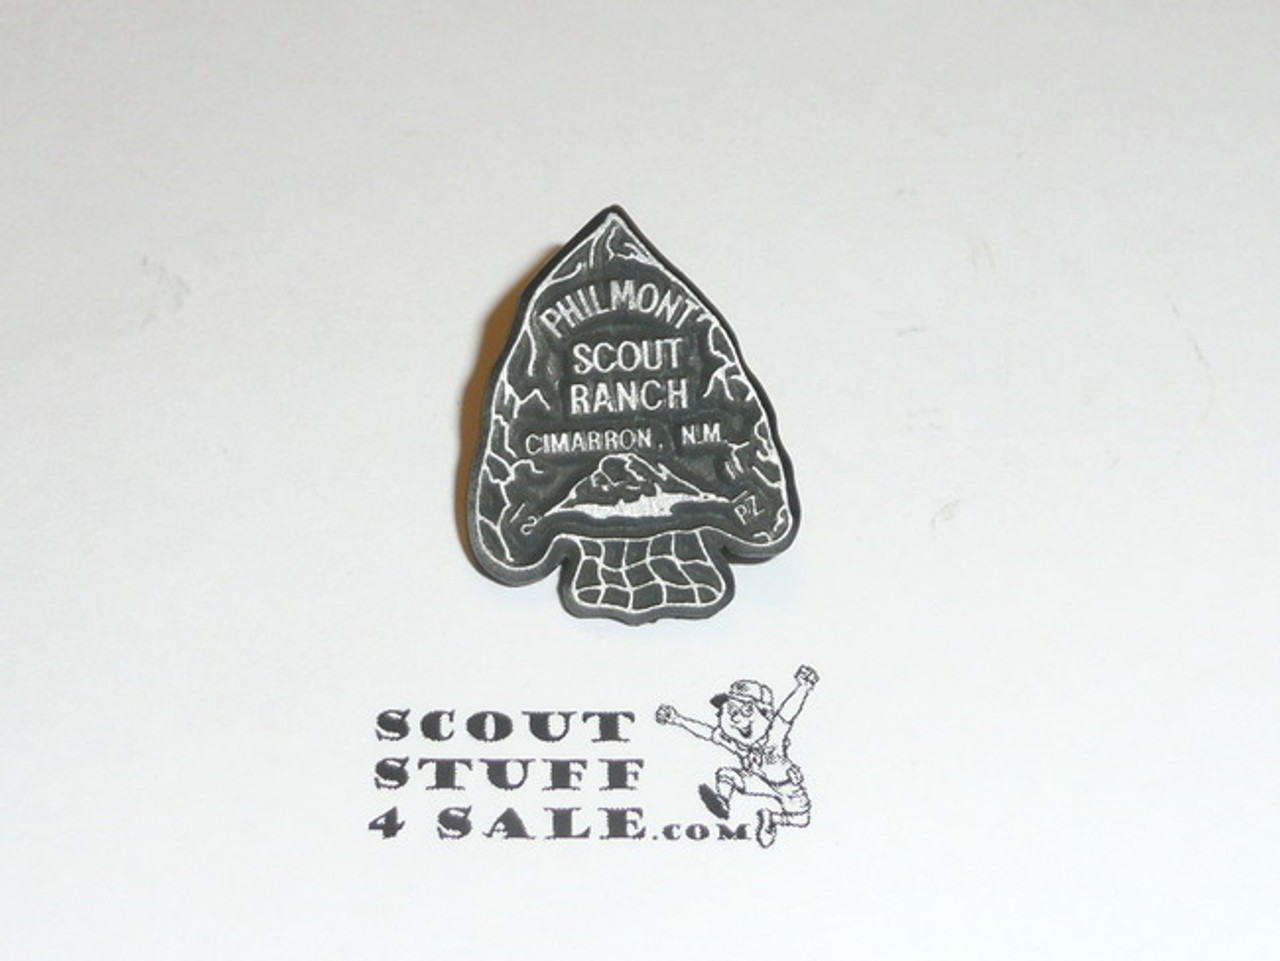 Philmont Scout Ranch, Pewter Arrowhead Pin